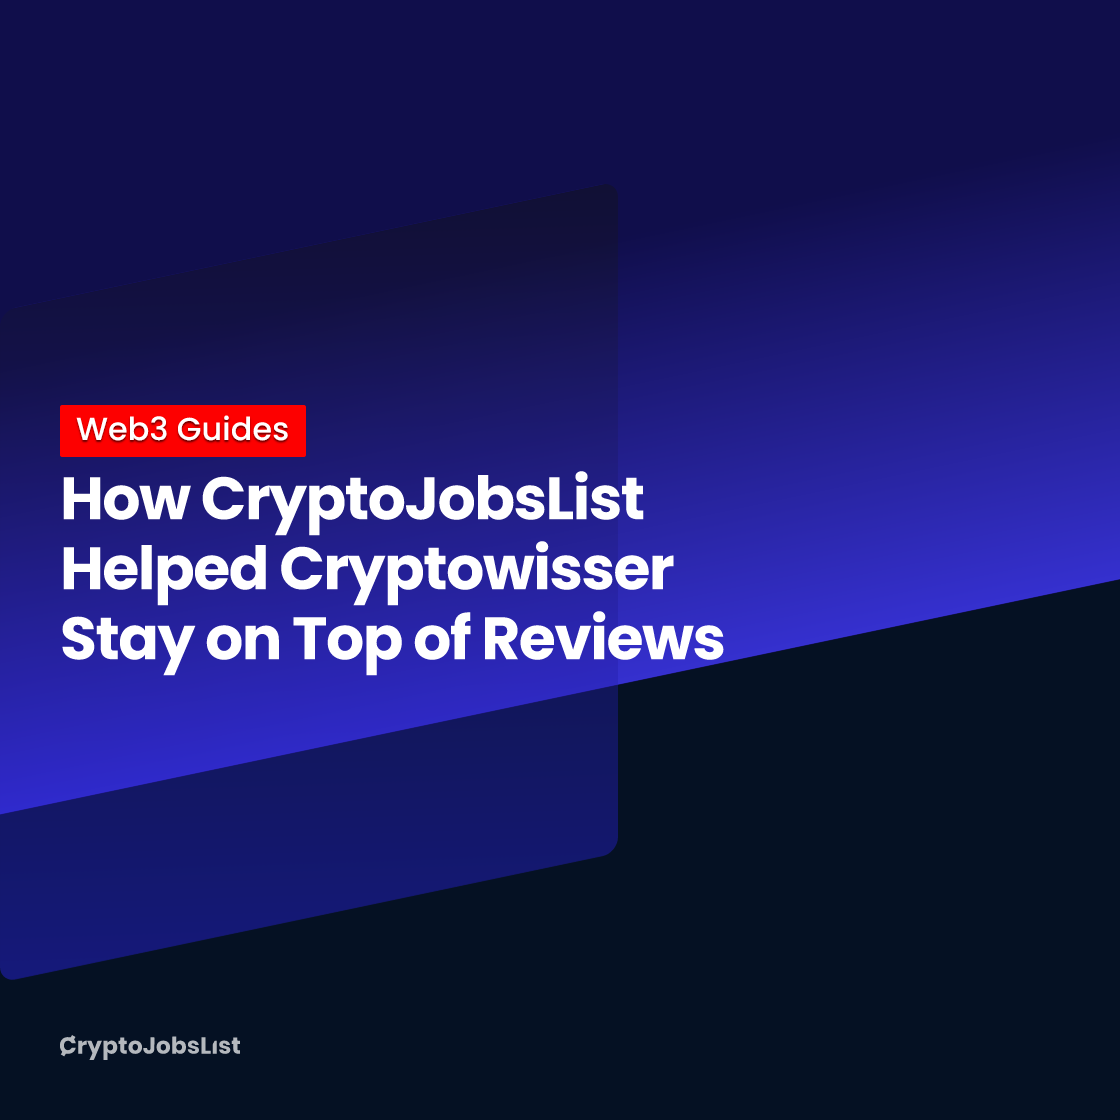 How CryptoJobsList Helped Cryptowisser Stay on Top of Reviews